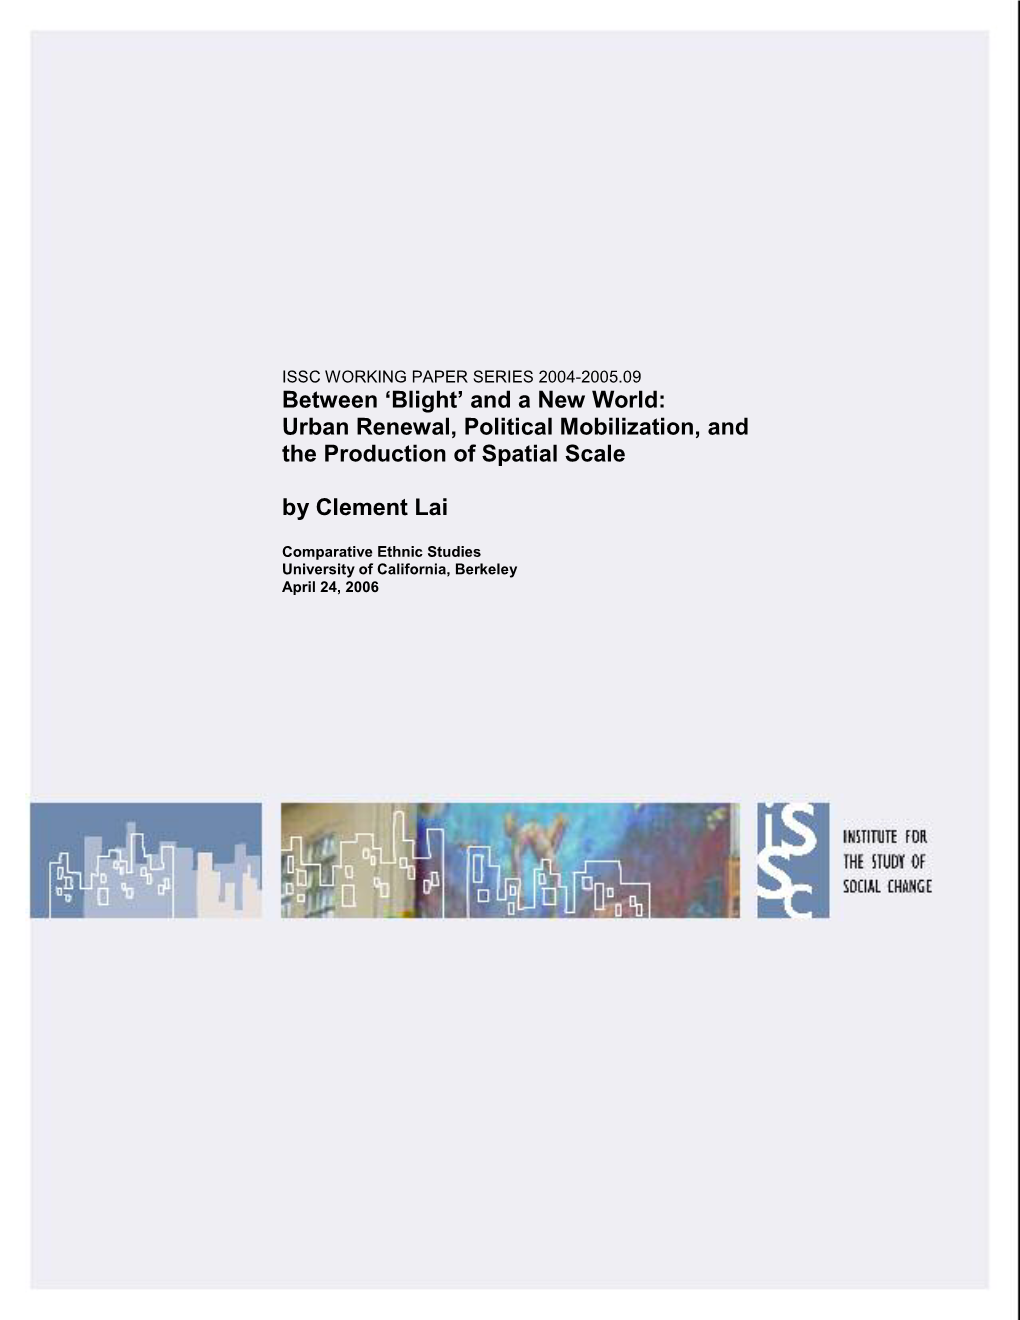 Blight’ and a New World: Urban Renewal, Political Mobilization, and the Production of Spatial Scale by Clement Lai